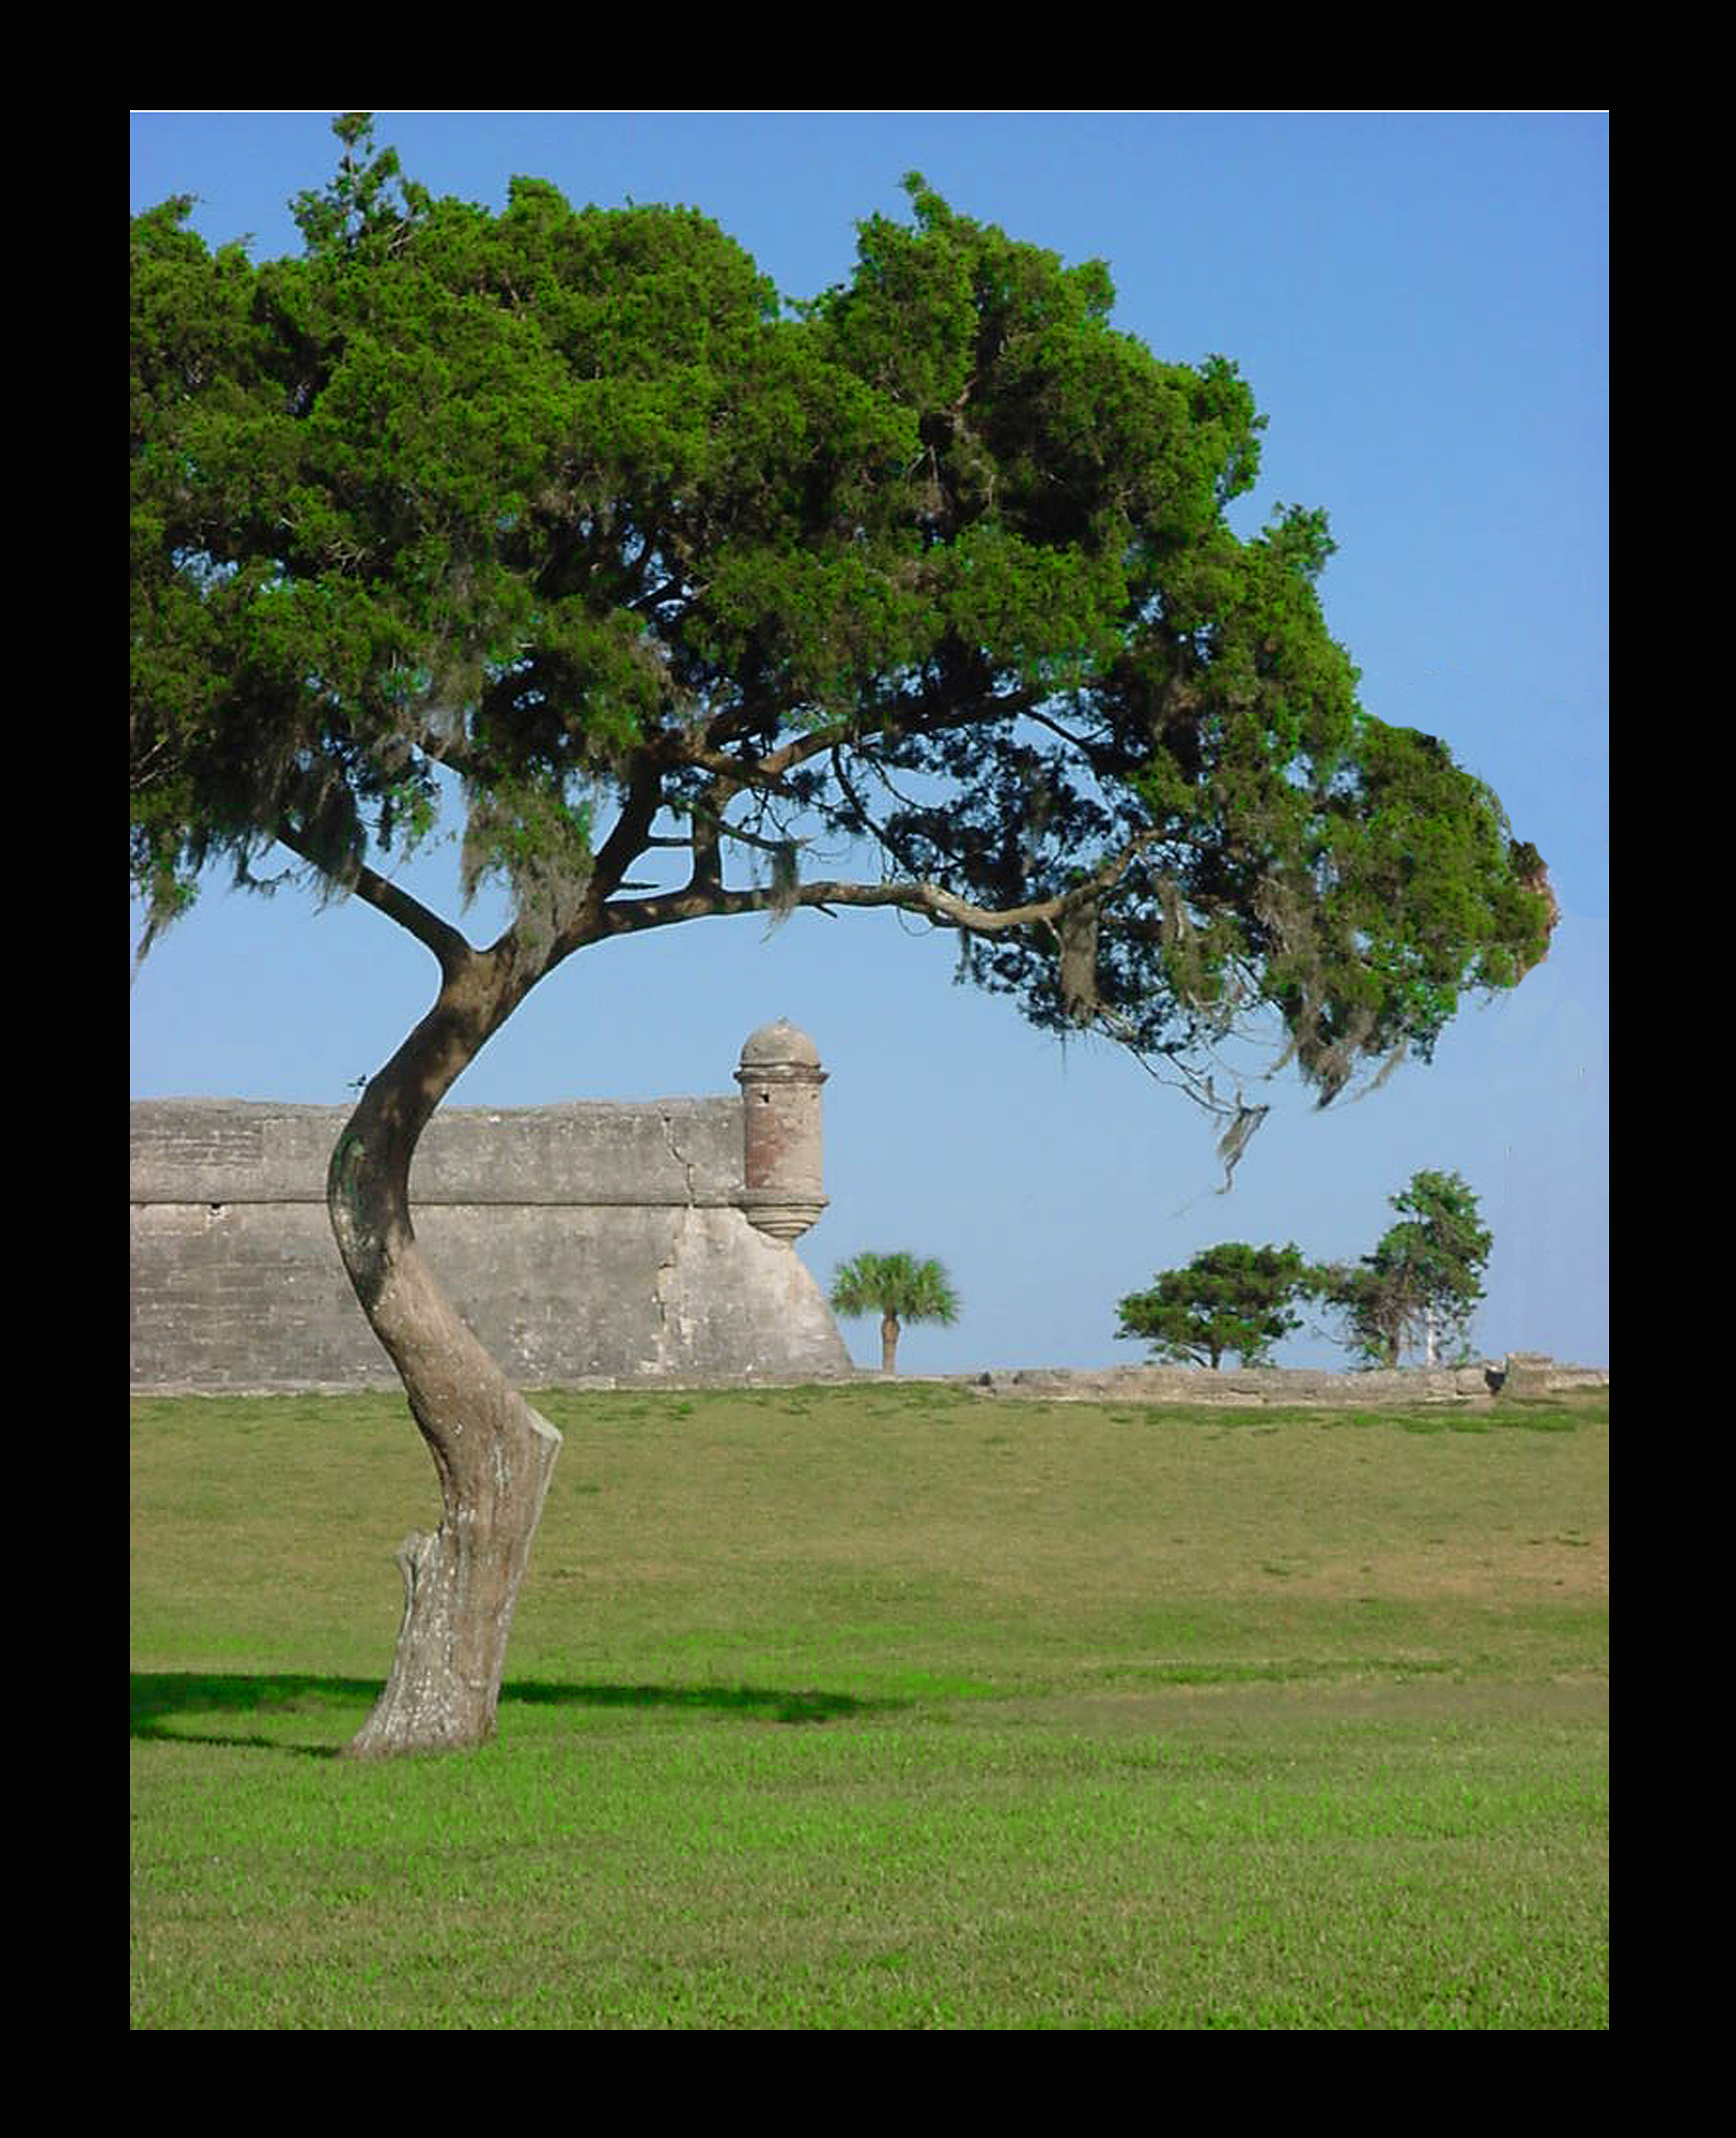 Castillo de San Marcos or Fort Matanzas Sentry Tower and weathered tree.